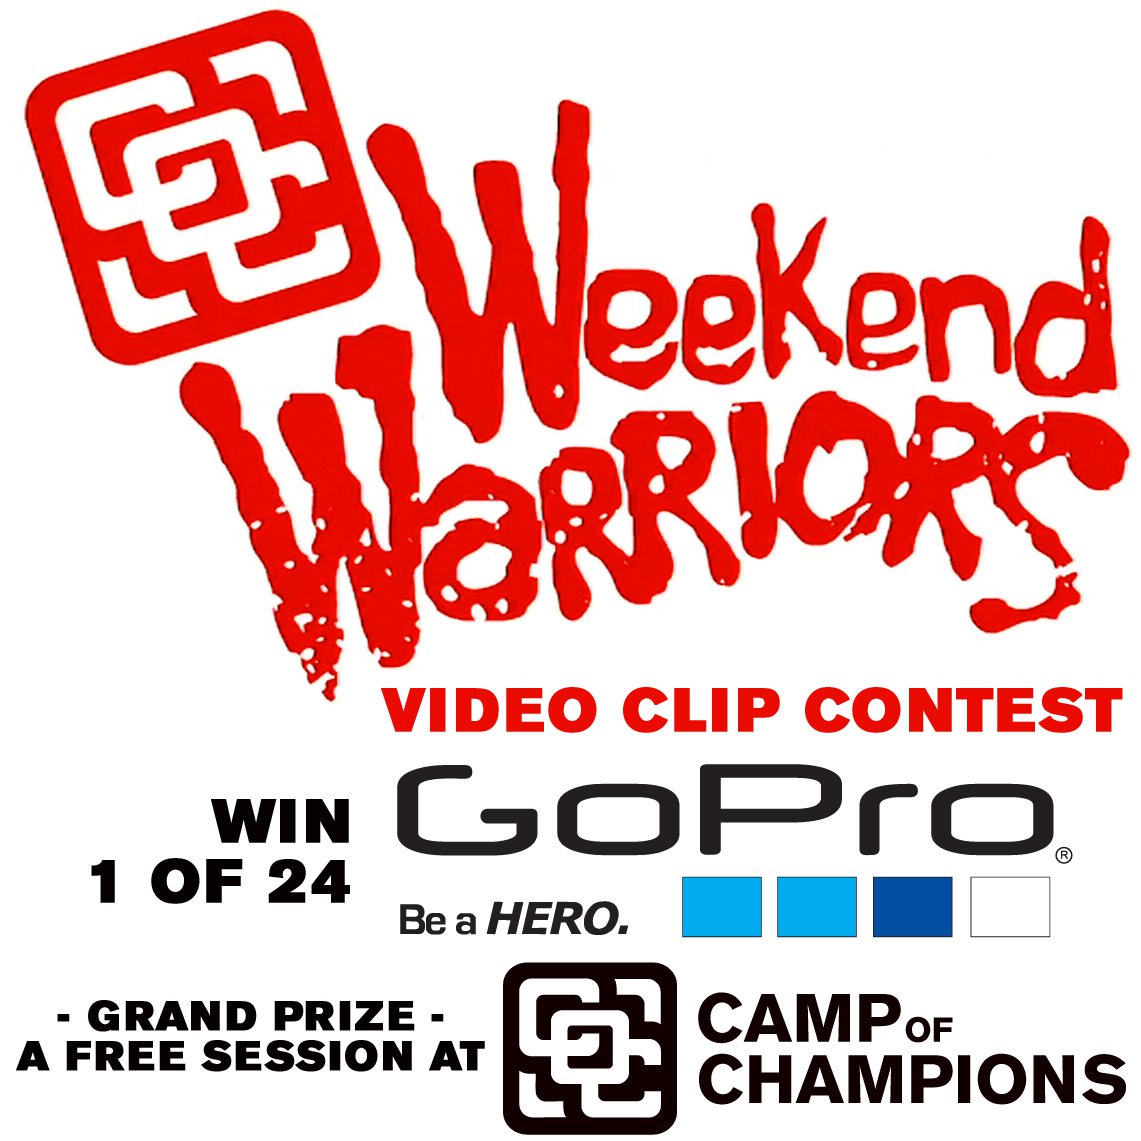 The Camp of Champions Weekend Warrior Contest